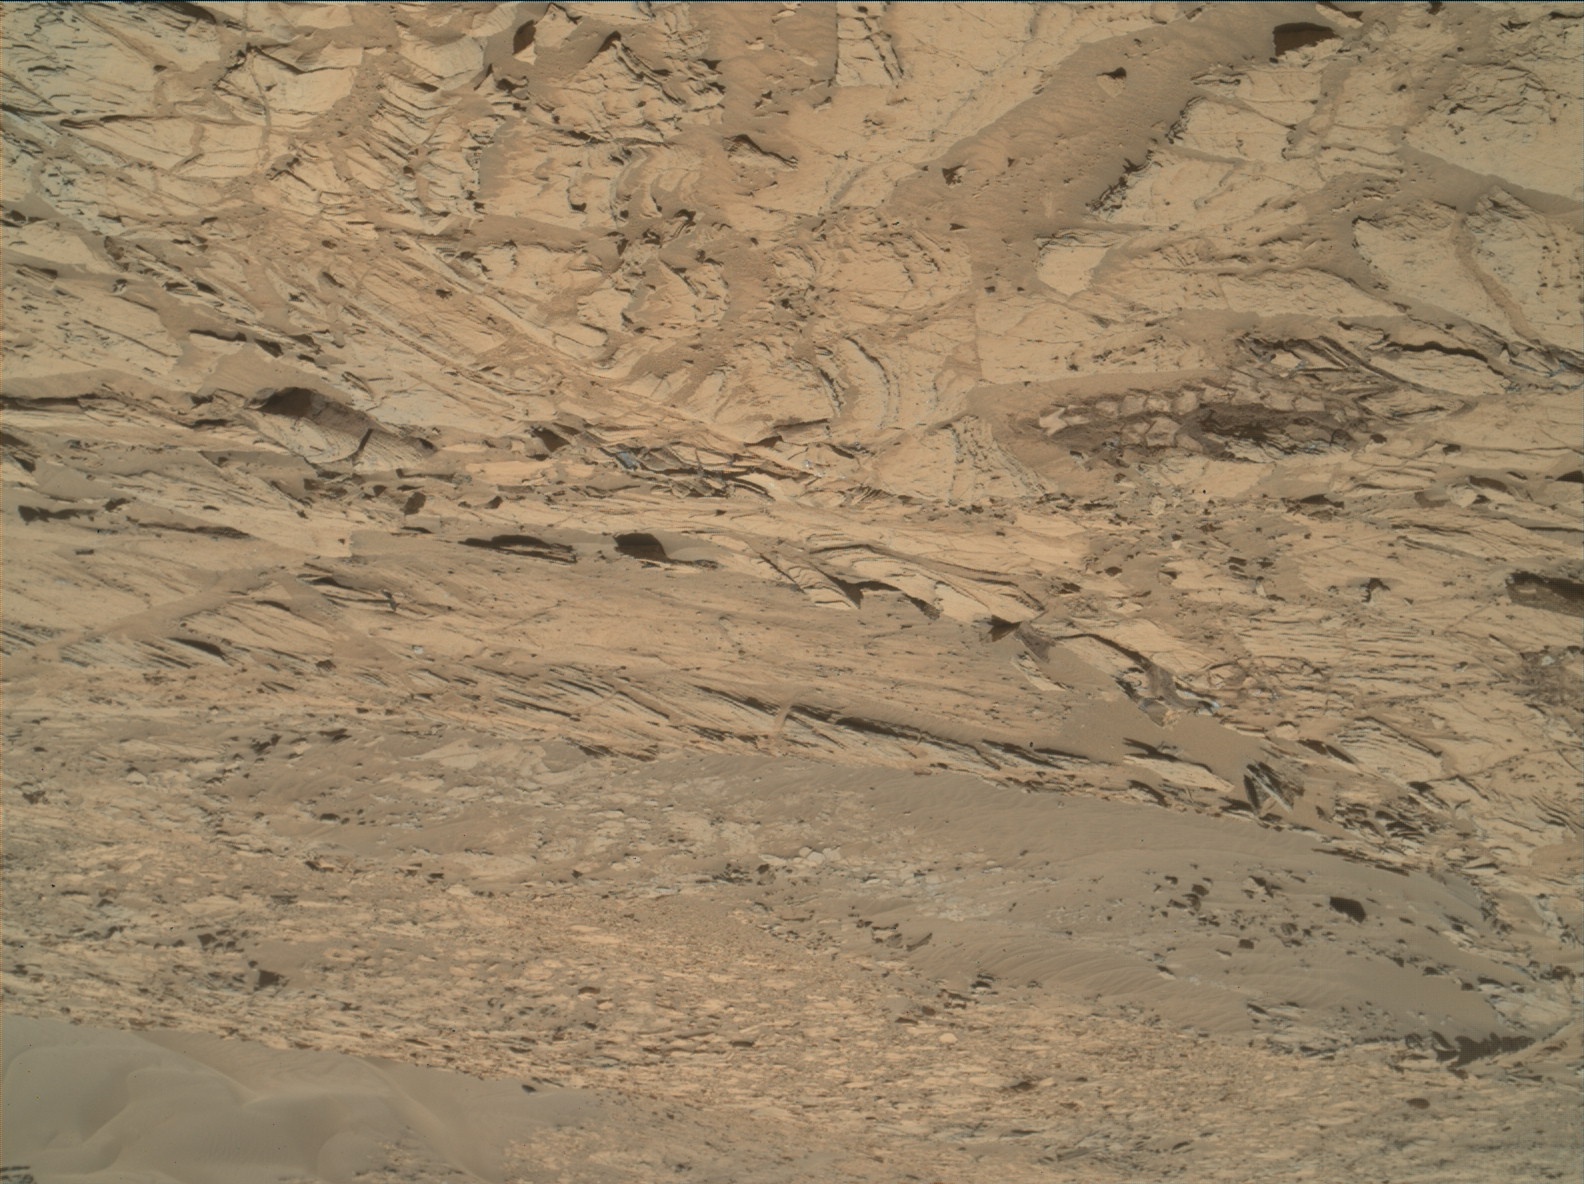 Nasa's Mars rover Curiosity acquired this image using its Mars Hand Lens Imager (MAHLI) on Sol 1126